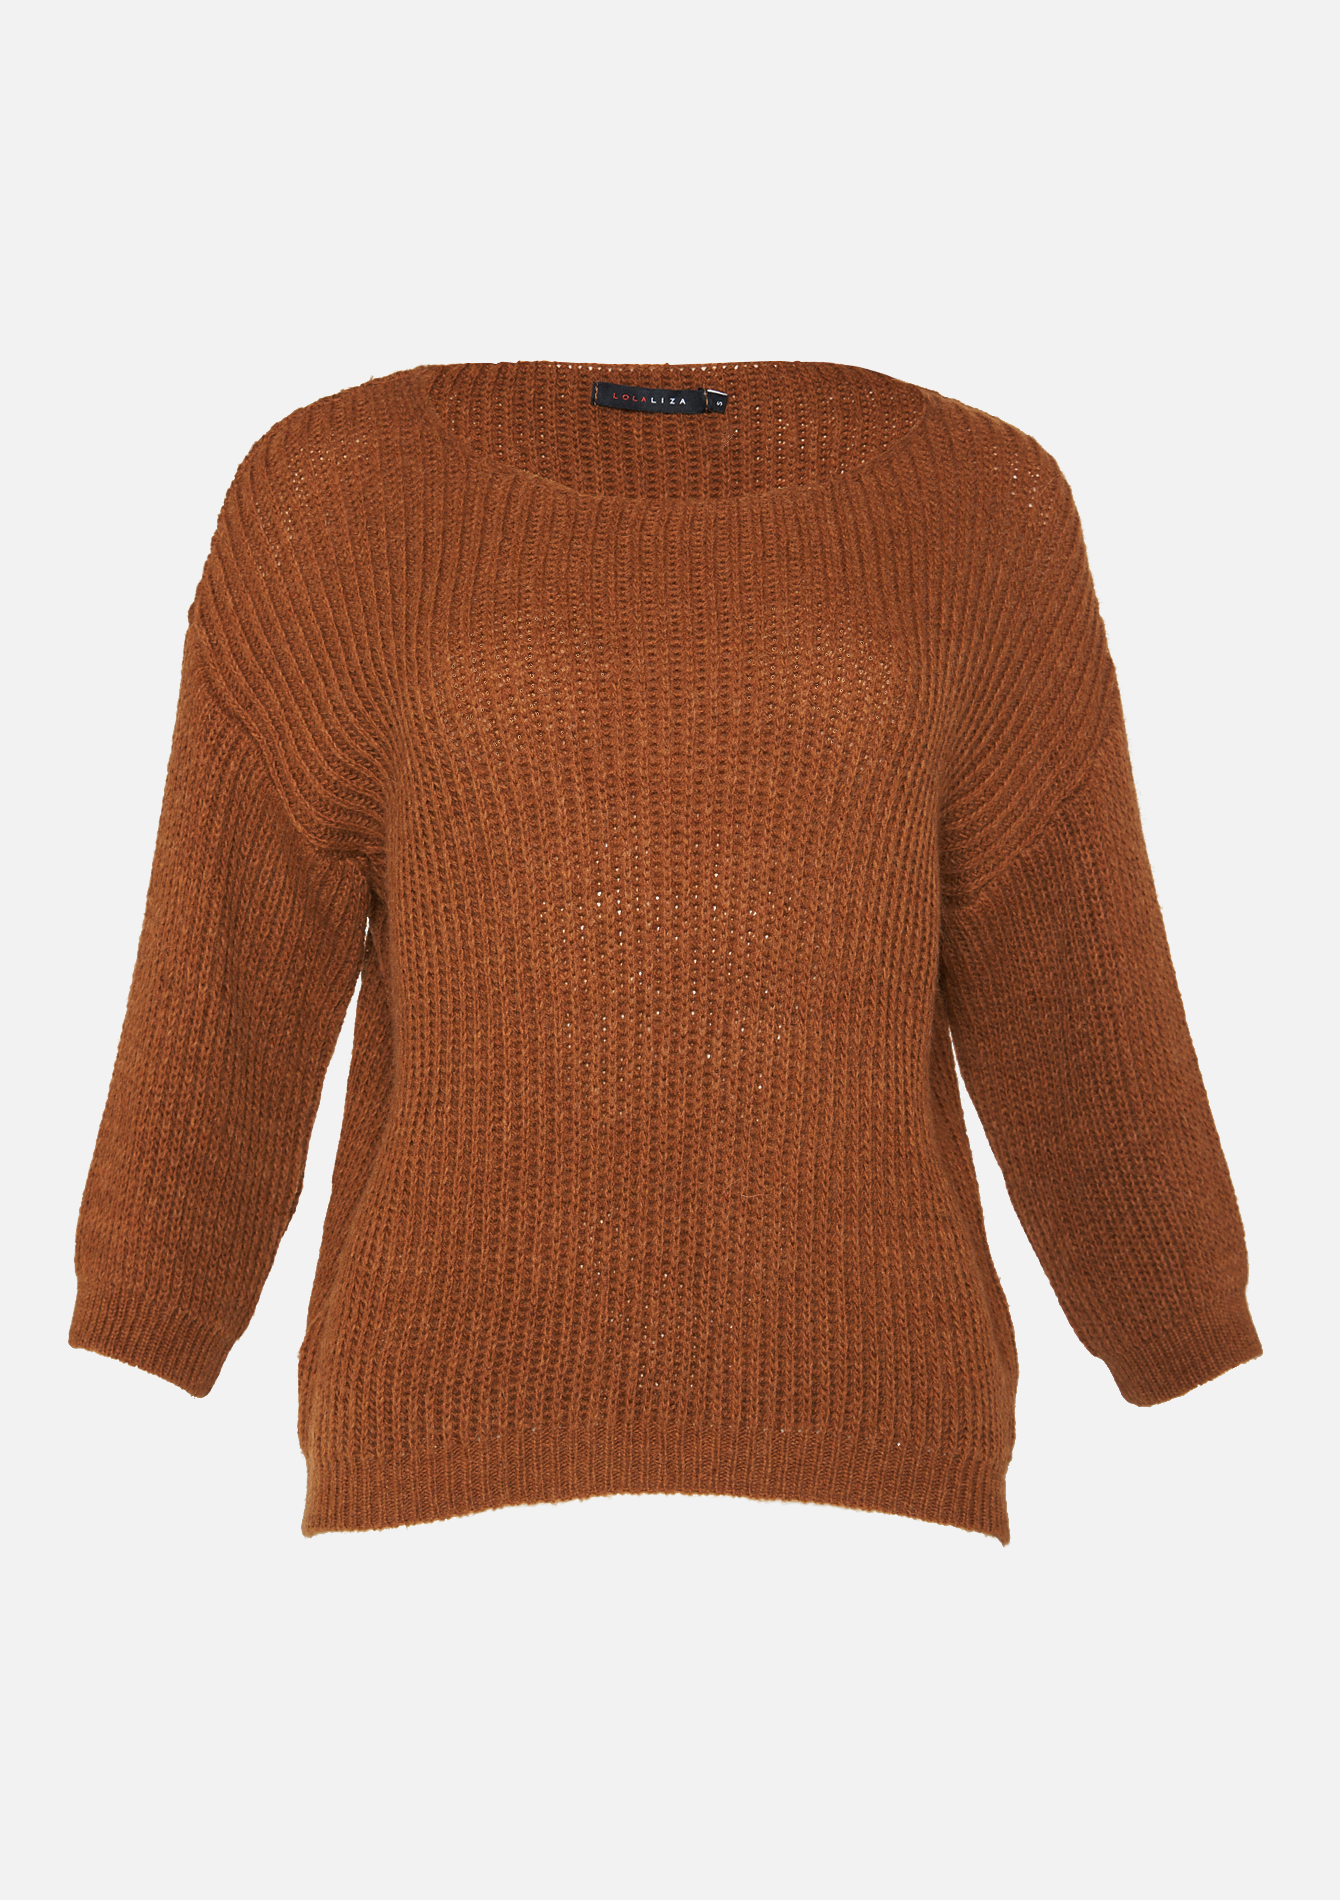 Sweater with dropped sleeves - CARAMEL - 04005435_1953